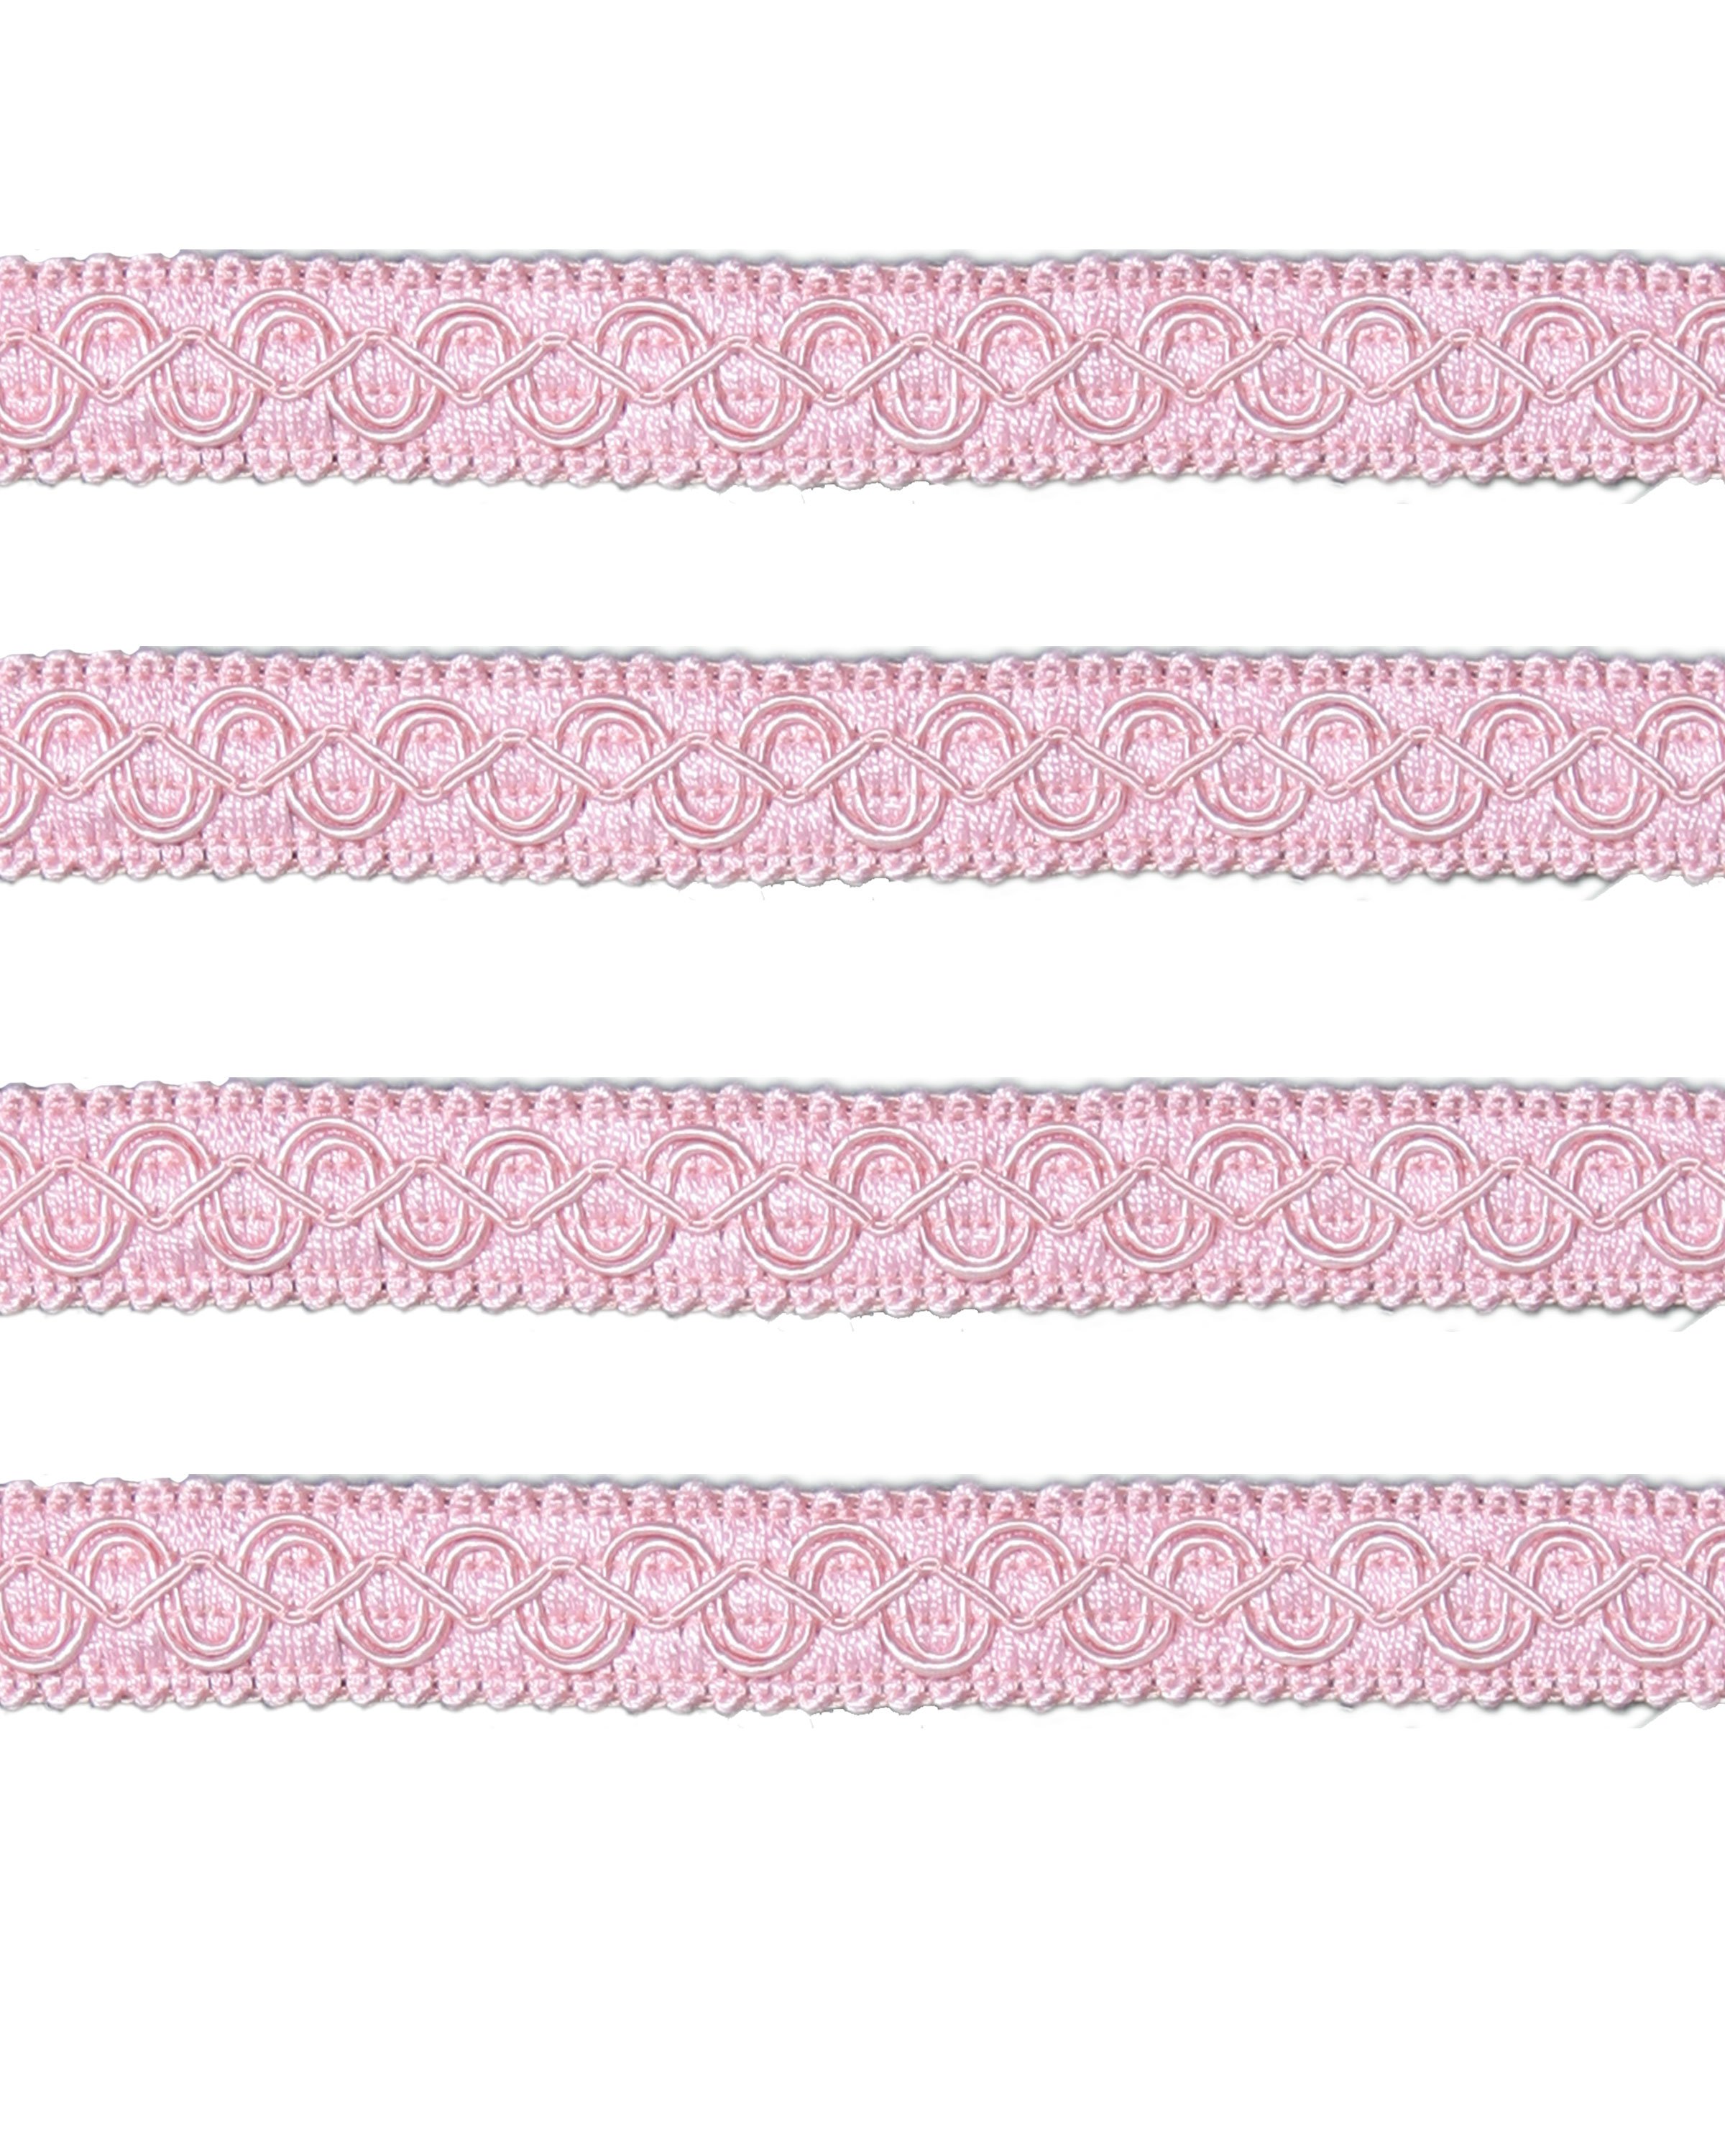 Fancy Braid - Dusky Pink 21mm Price is for 5 metres